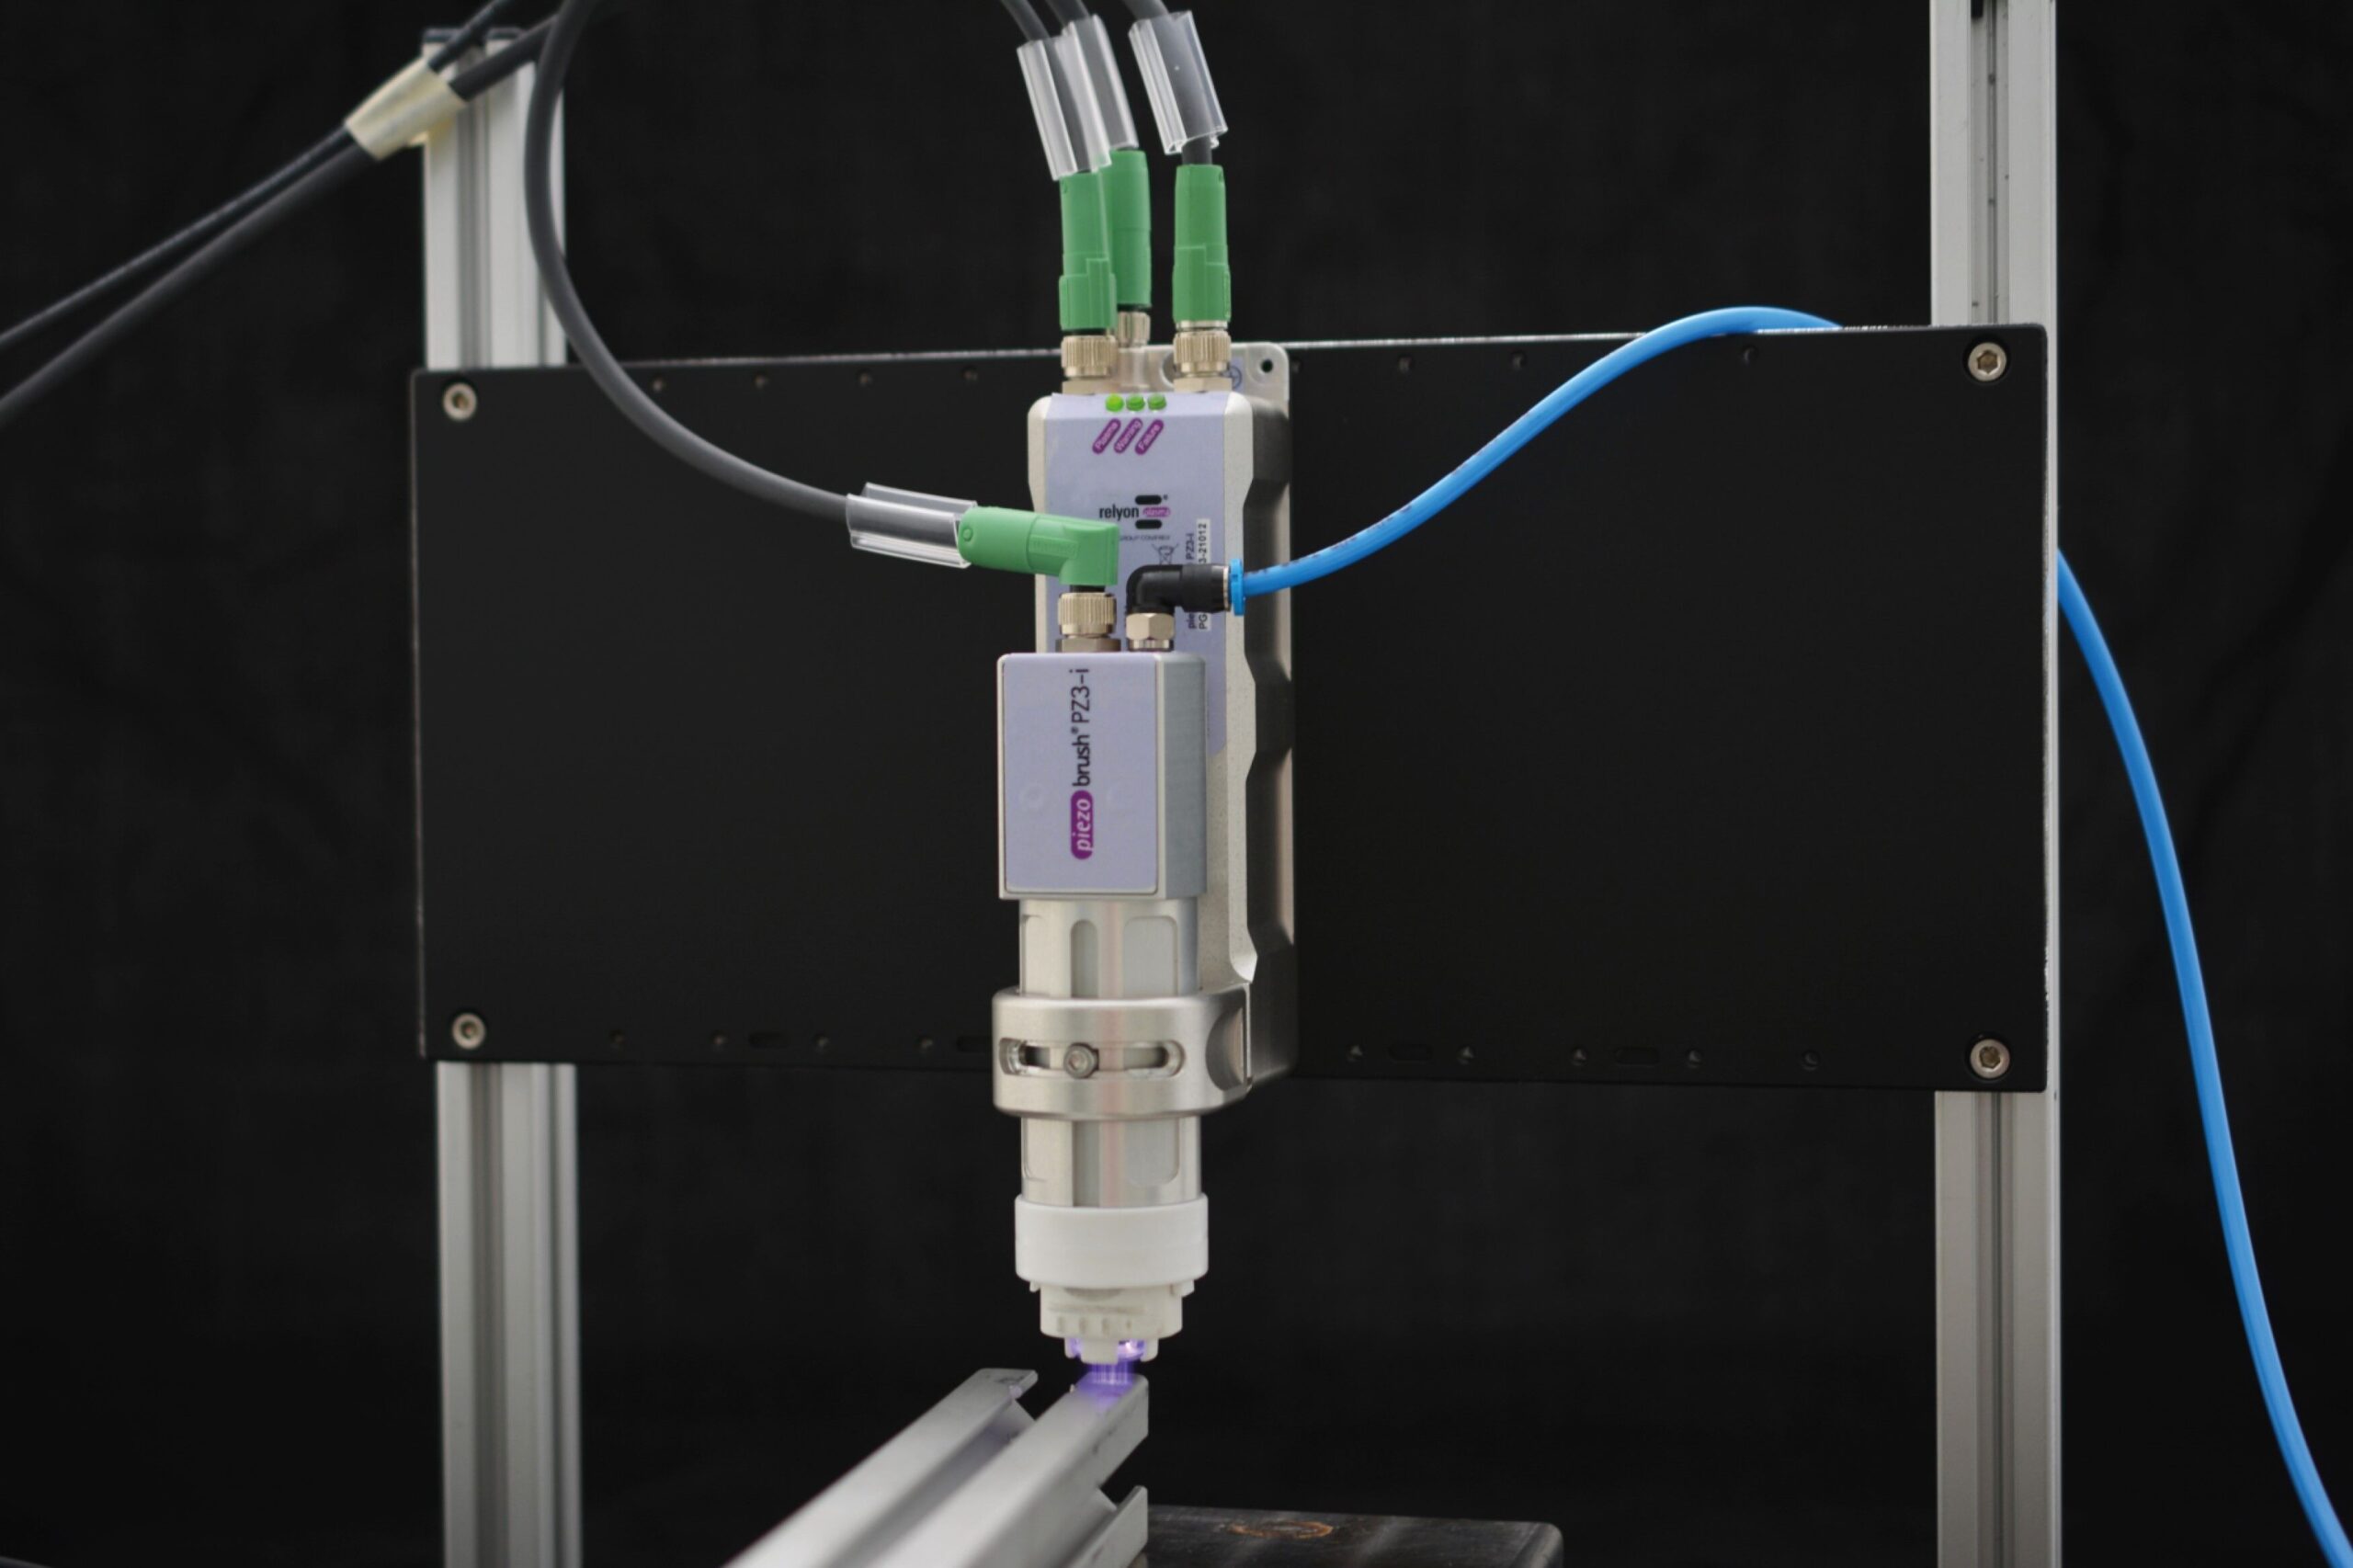 New automatable cold plasma surface treatment technology introduced